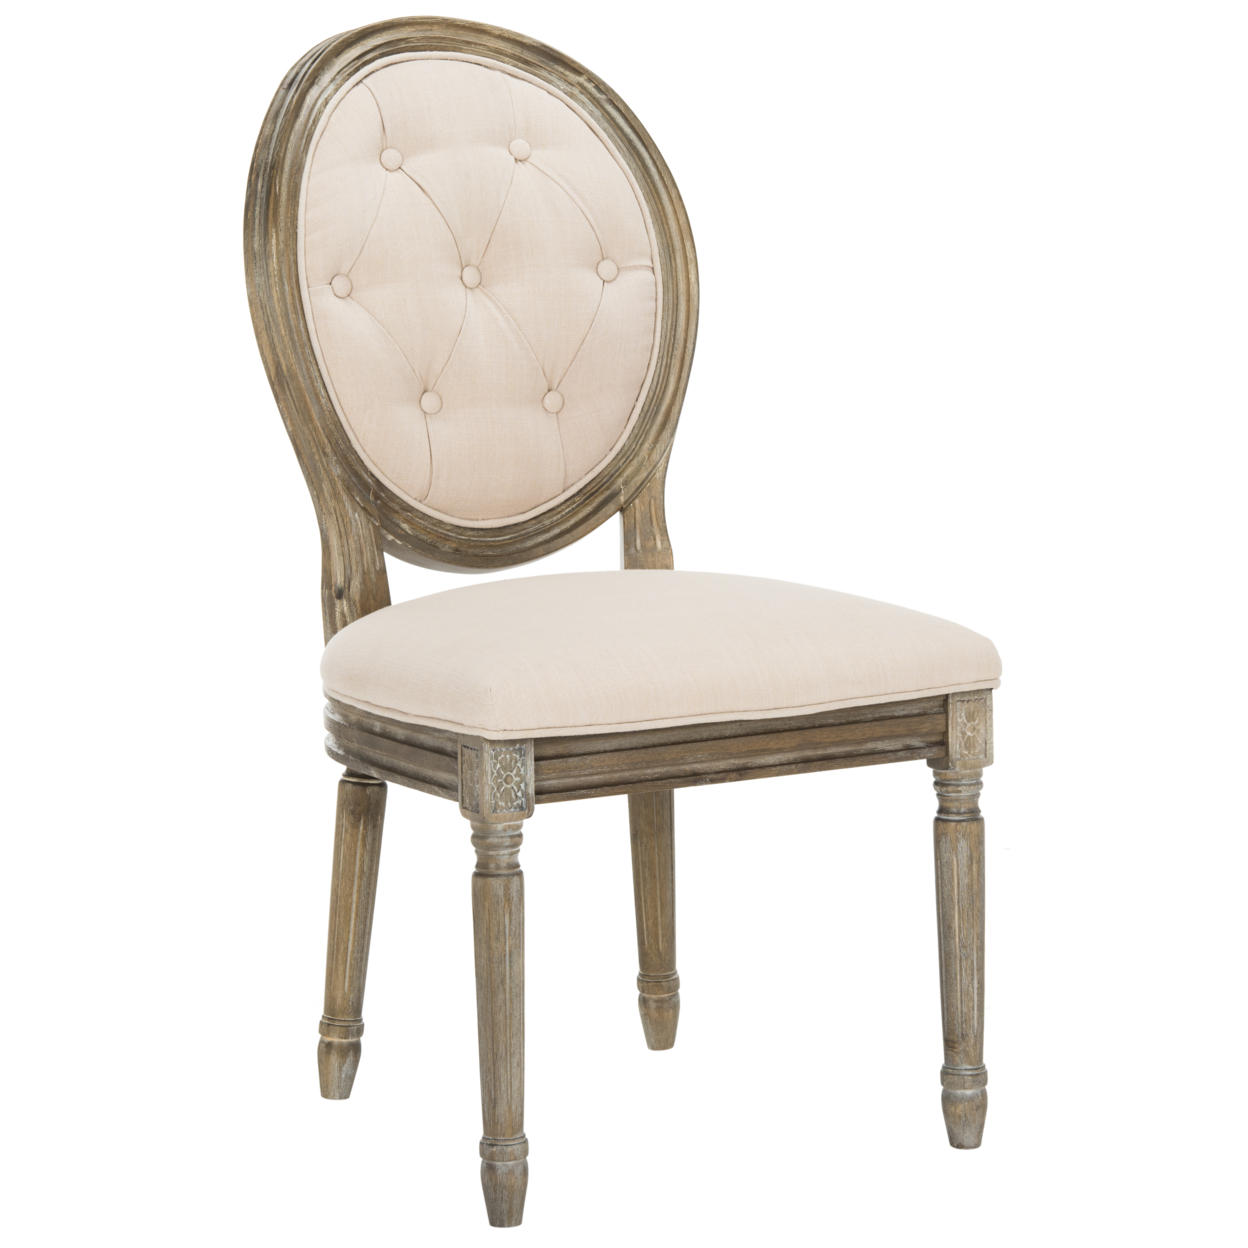 SAFAVIEH Holloway Tufted Oval Side Chair Set Of 2 Beige